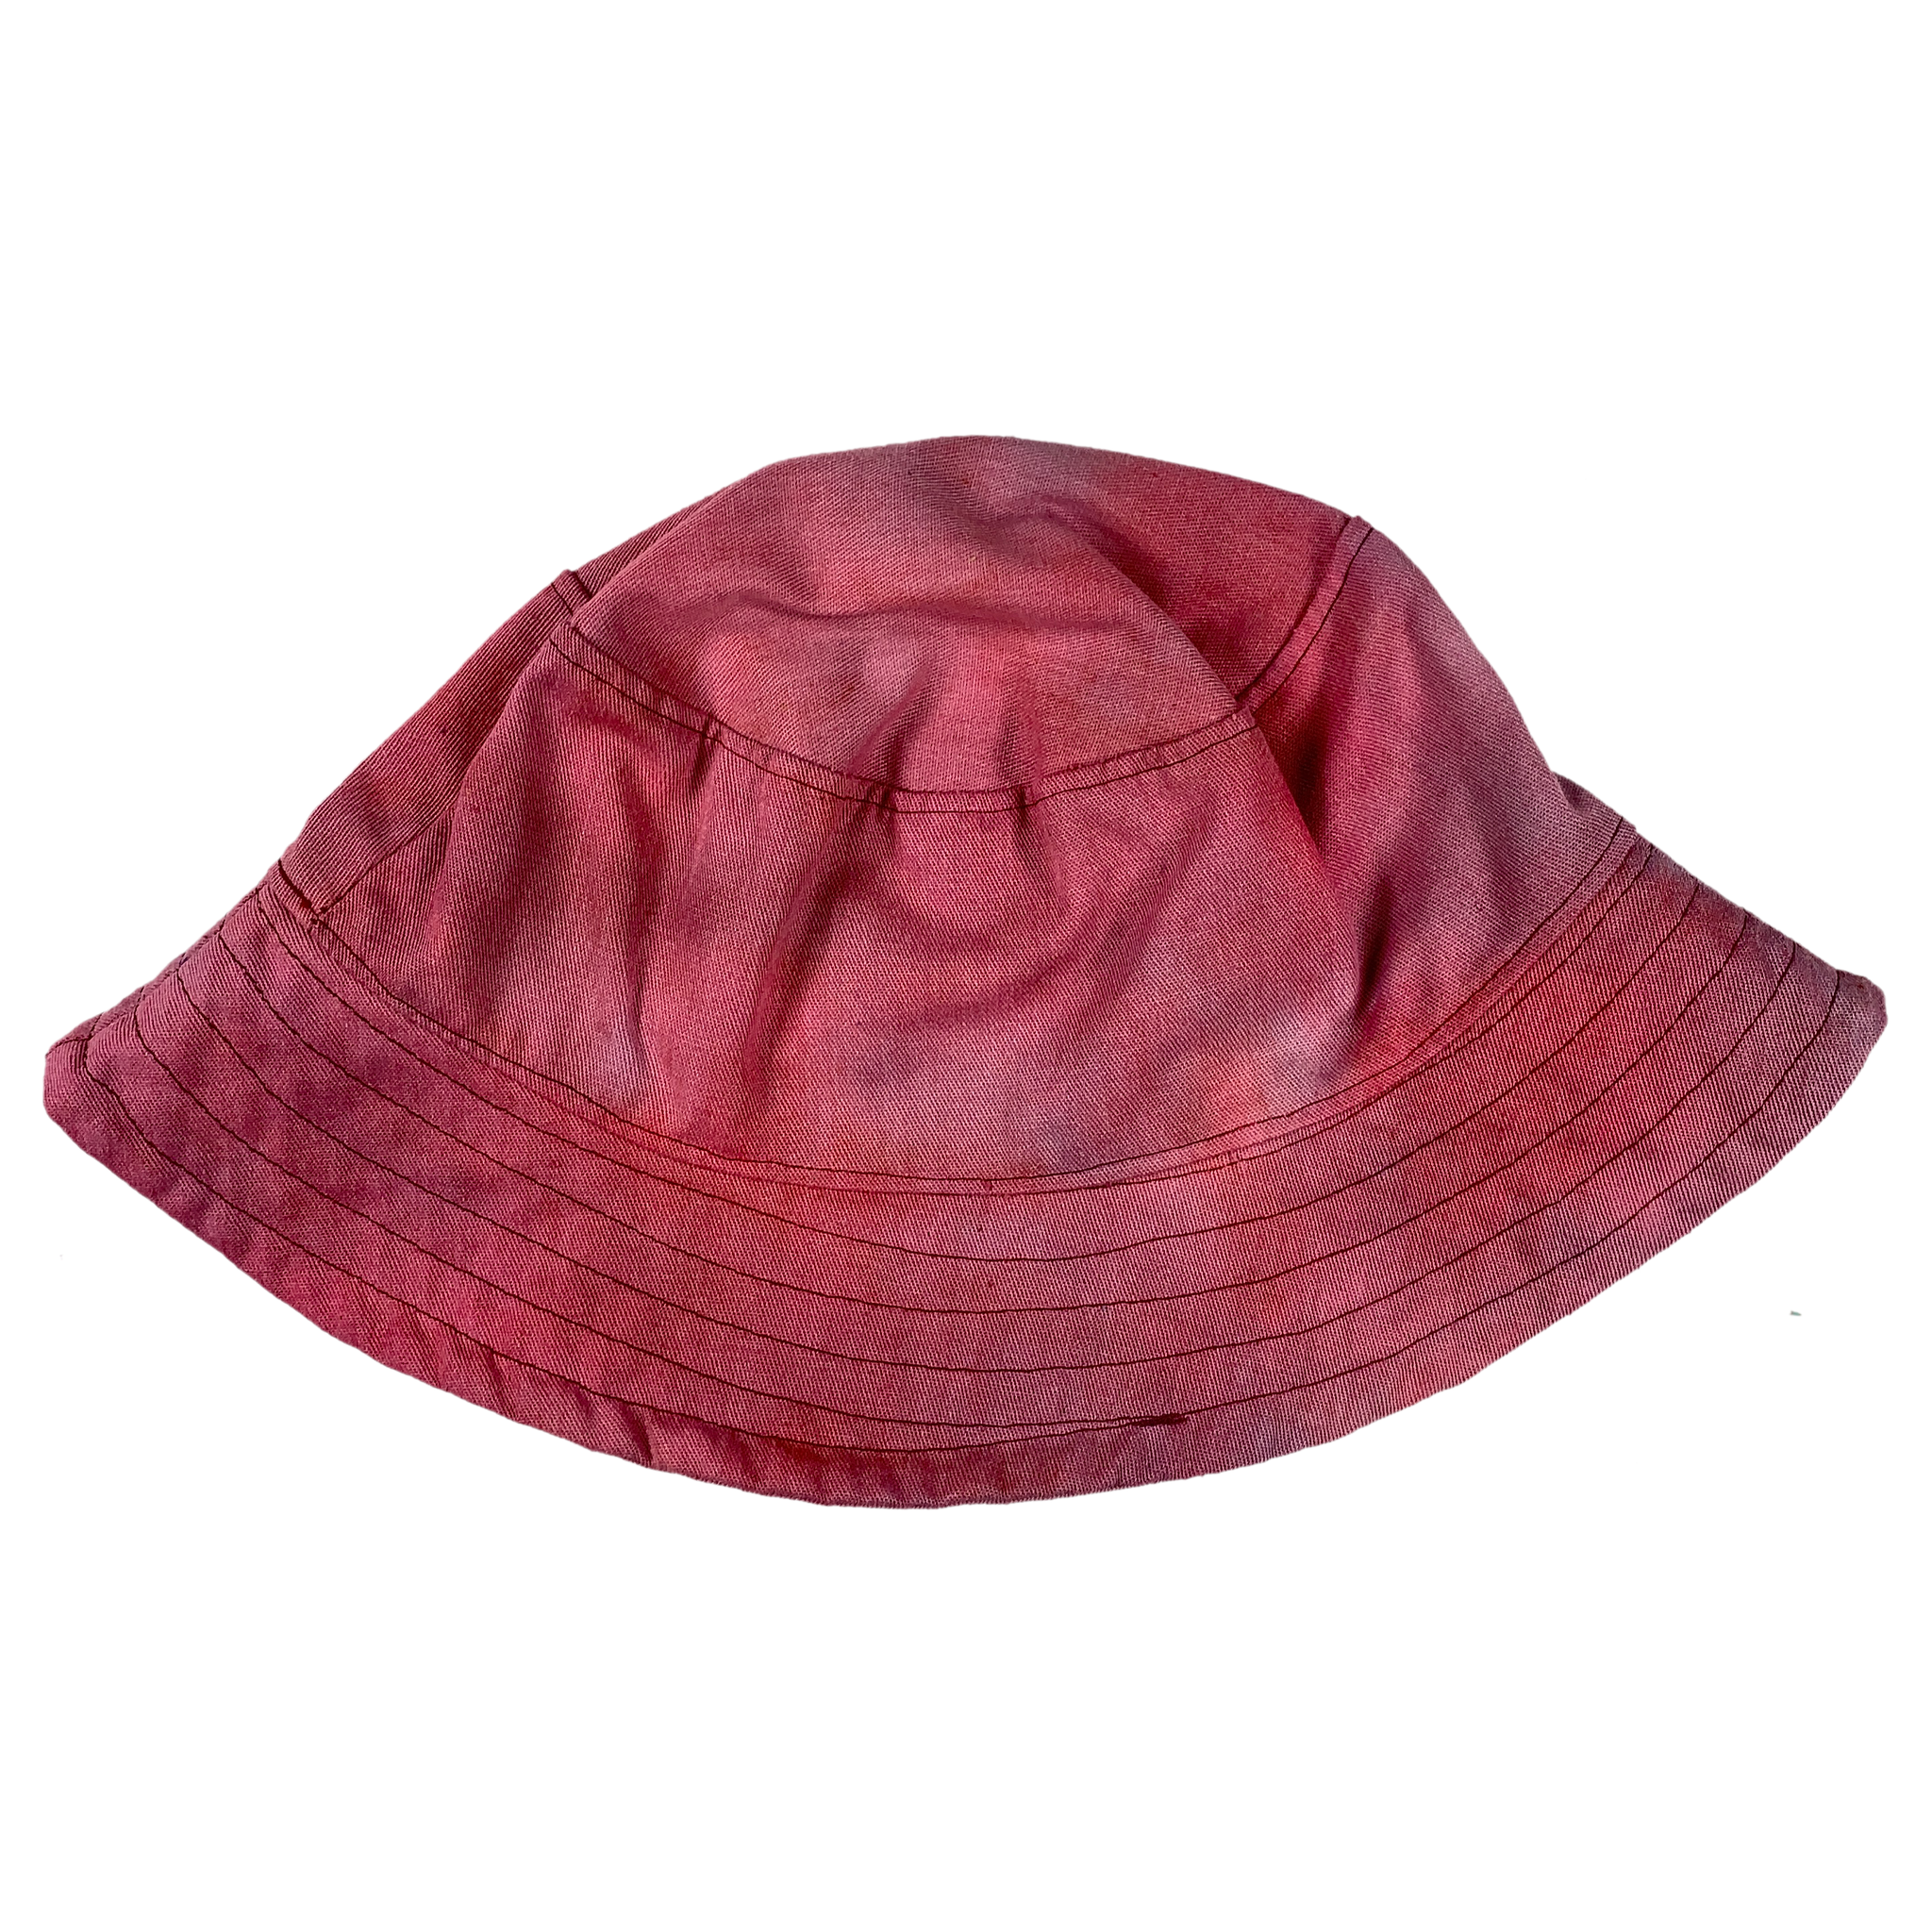 Hand Made and Dyed Bucket Hat - XL/25"